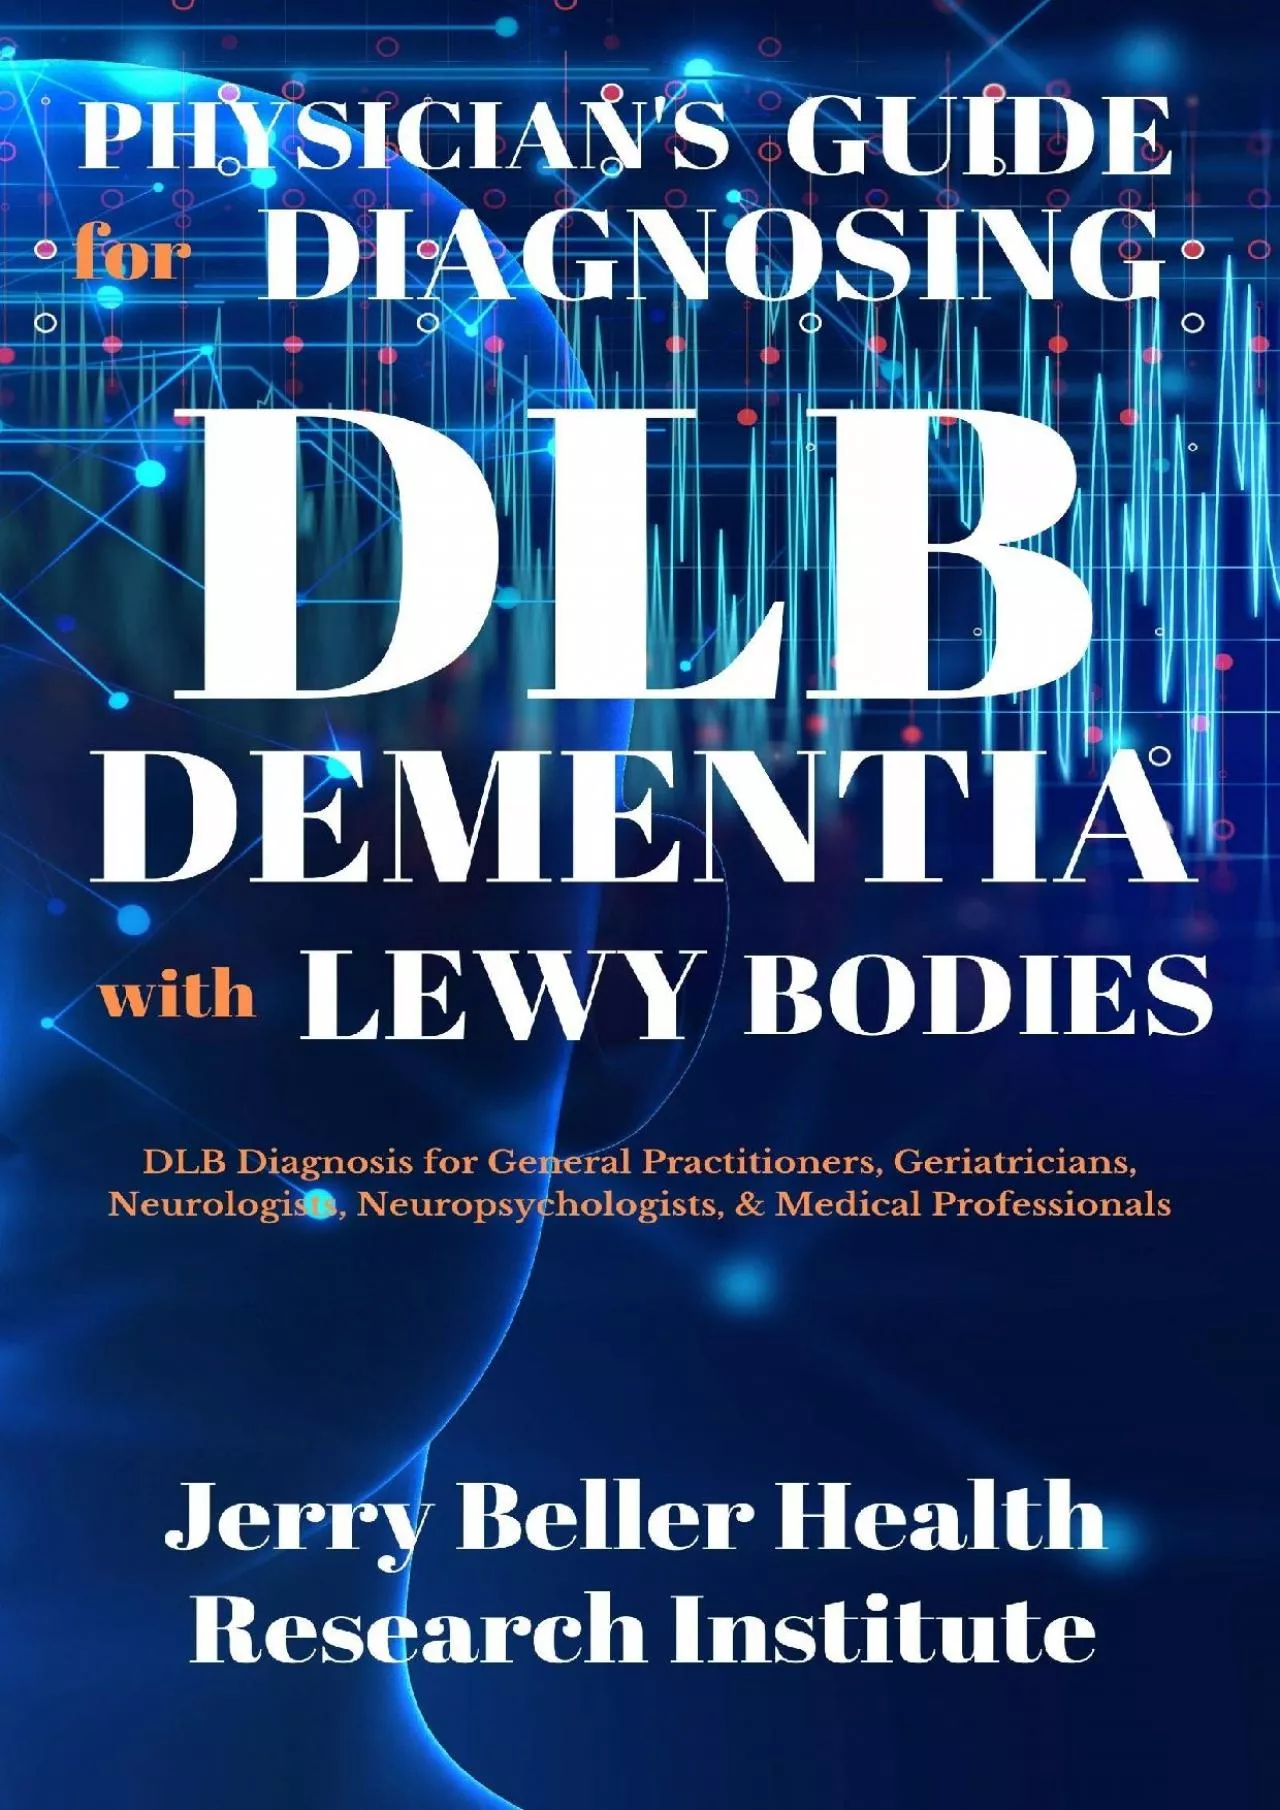 (DOWNLOAD)-PHYSICIANS GUIDE FOR DIAGNOSING DEMENTIA with LEWY BODIES: DLB Diagnosis for